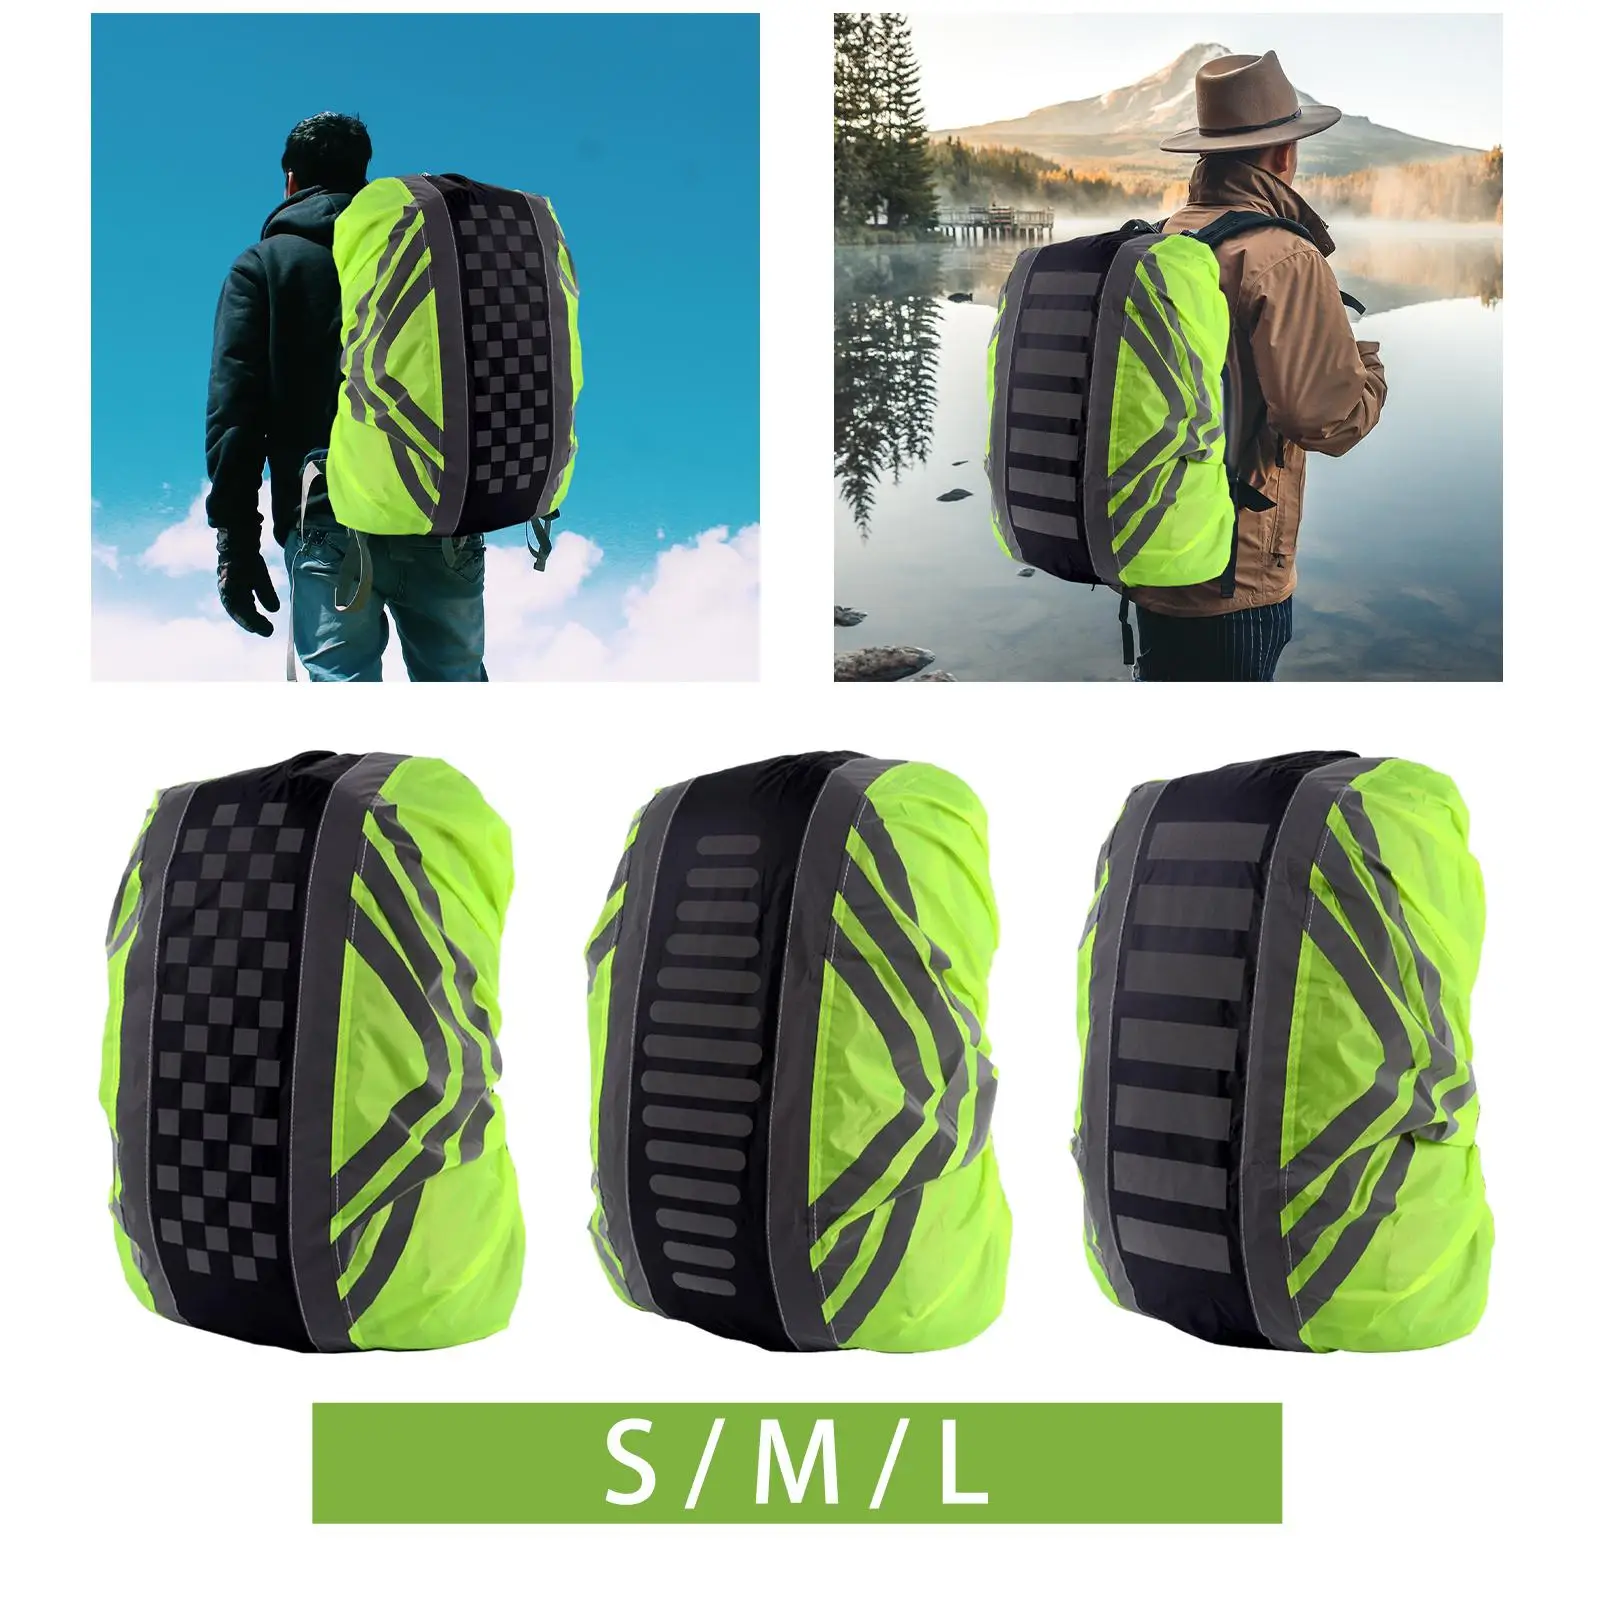 Backpack Rain Cover Waterproof High Visibility with Reflective Strip Rucksack Covers for Camping Traveling Outdoor Activities